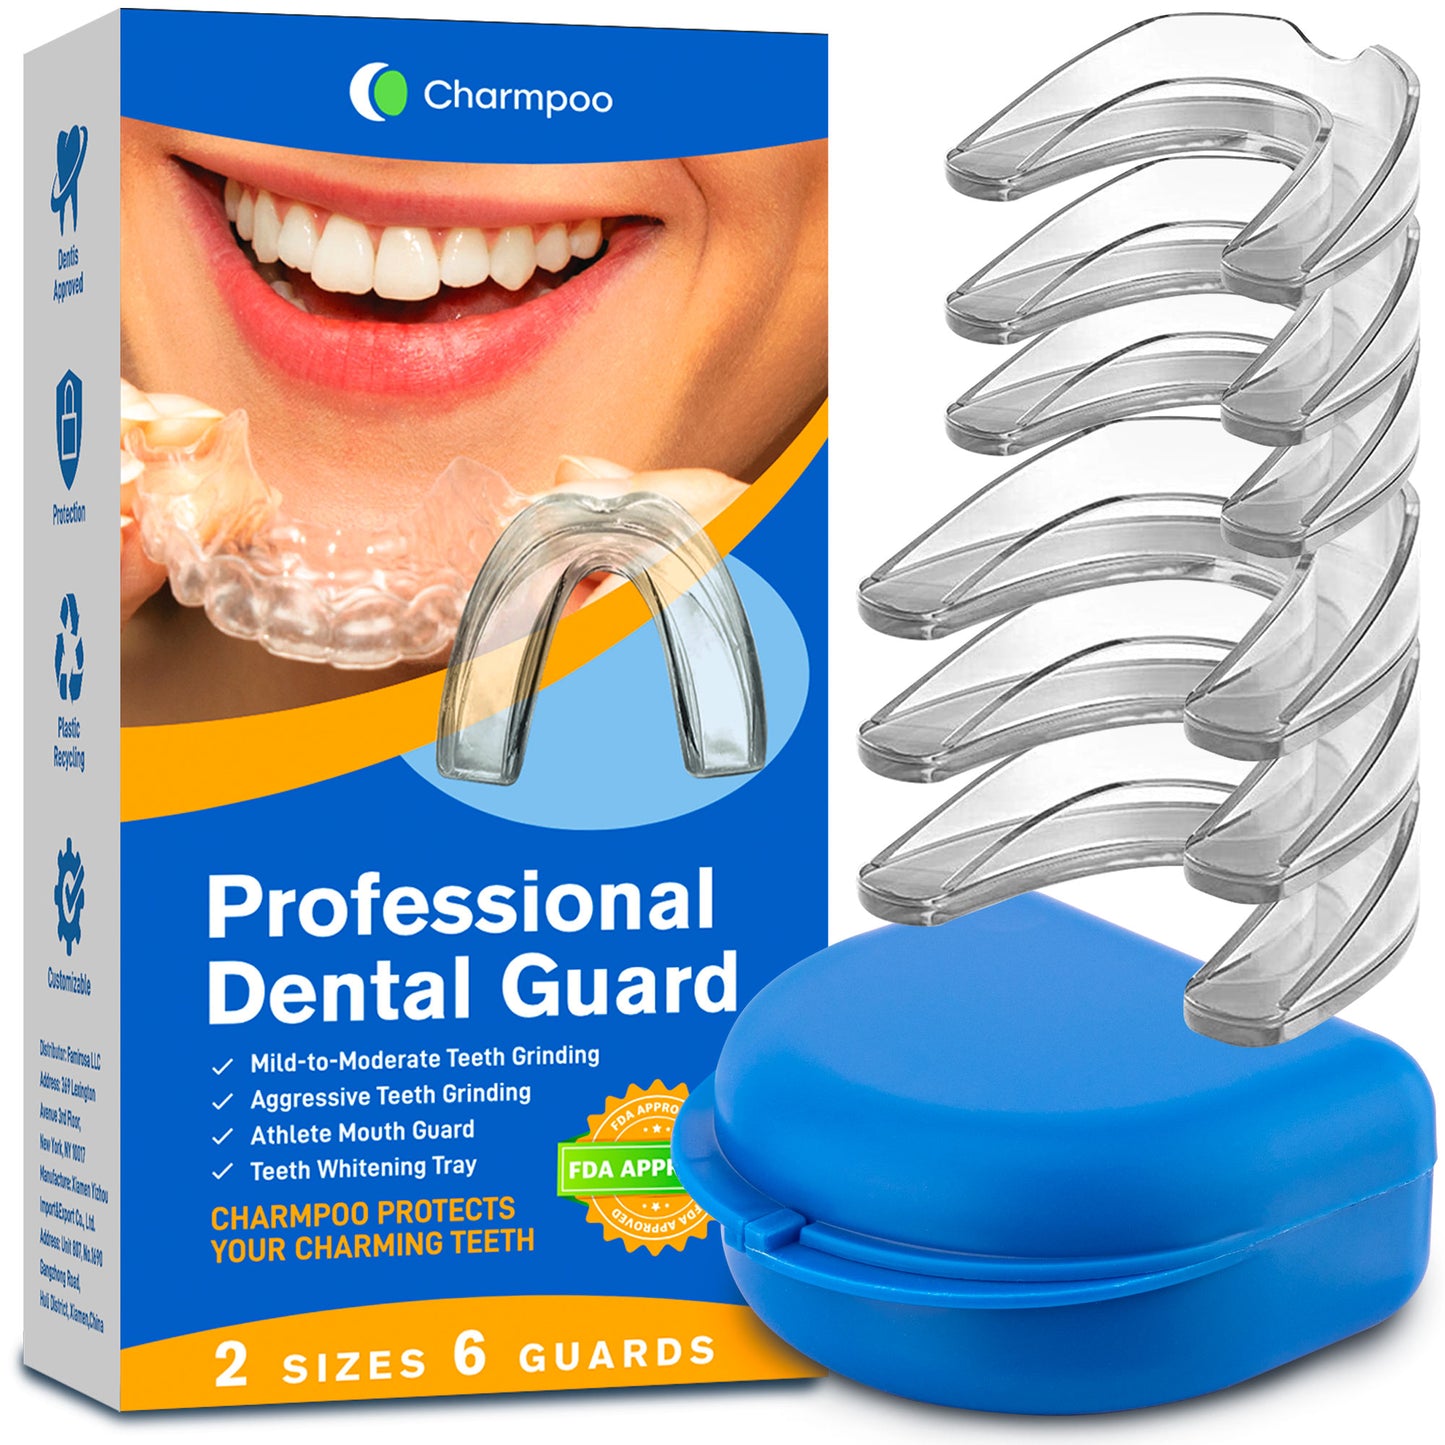 Charmpoo Mouth Guard for Grinding Teeth-Mouth Guard for Clenching Teeth at Night-Pack of 6 with 2 Sizes-Night Guard Stops Bruxism, Tmj & Eliminates Teeth Clenching